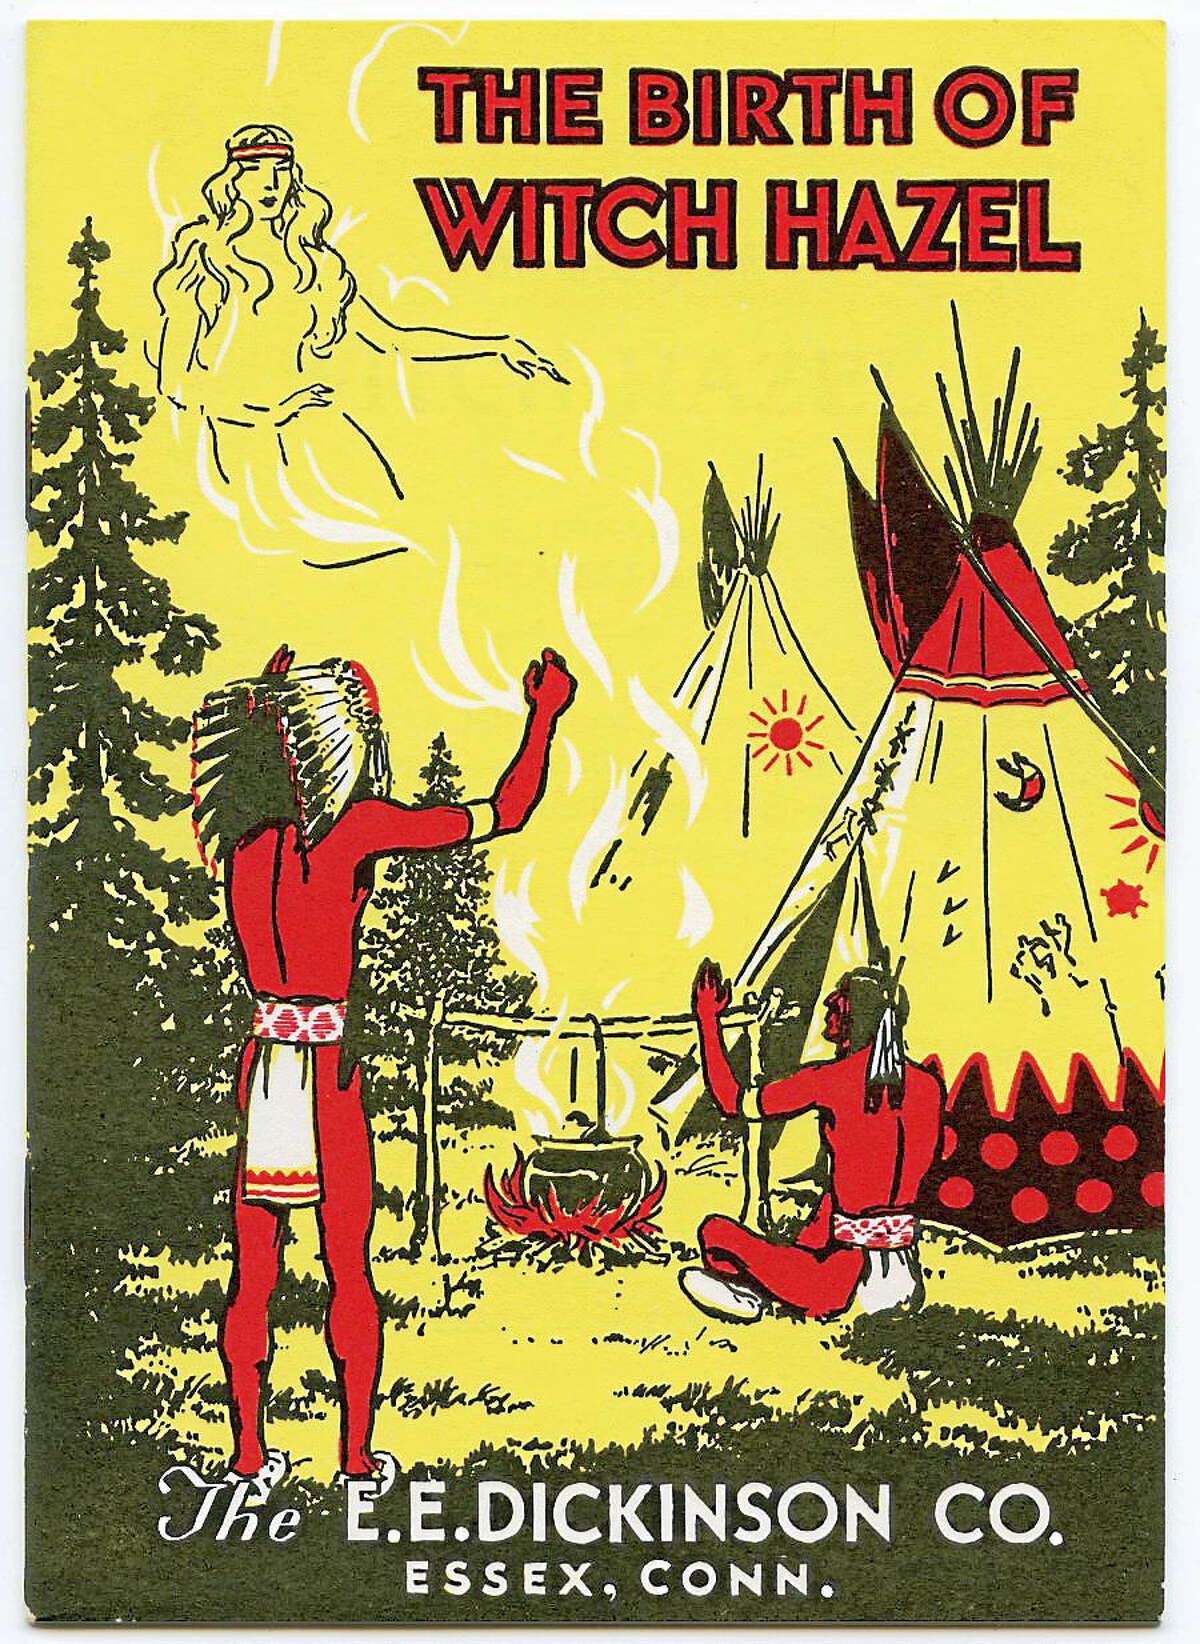 Contributed photo 'The Birth of Witch Hazel,' an advertisement for E.E. Dickinson.